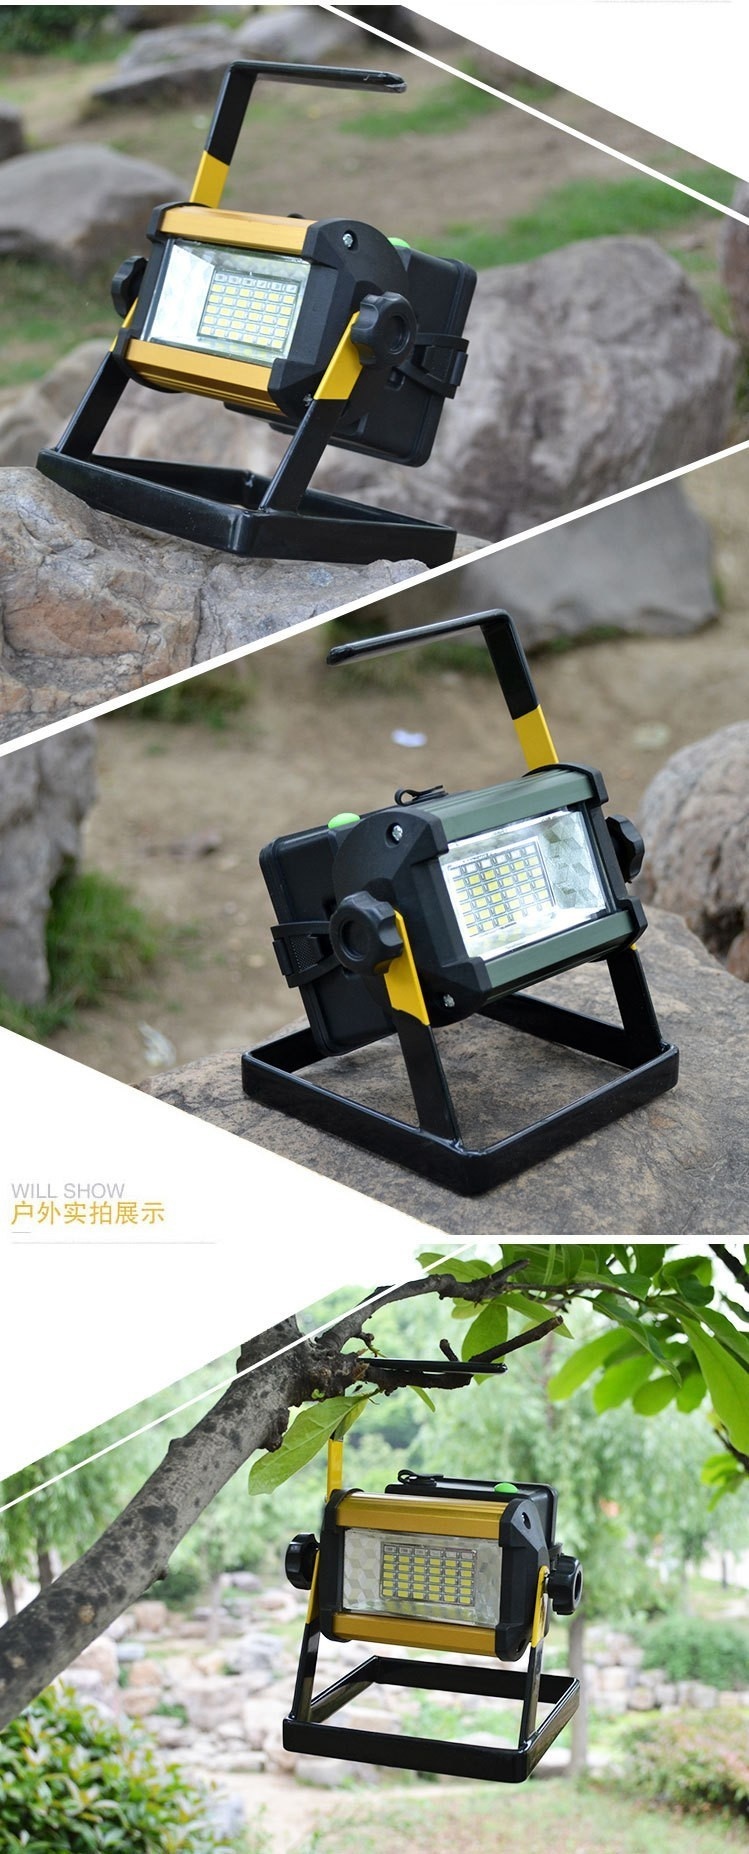 3Pcs Waterproof IP65 50W LED Floodlight Rechargeable 36LED Flood Light SpotLights Light For Outdoor +4*18650 battery + Charger